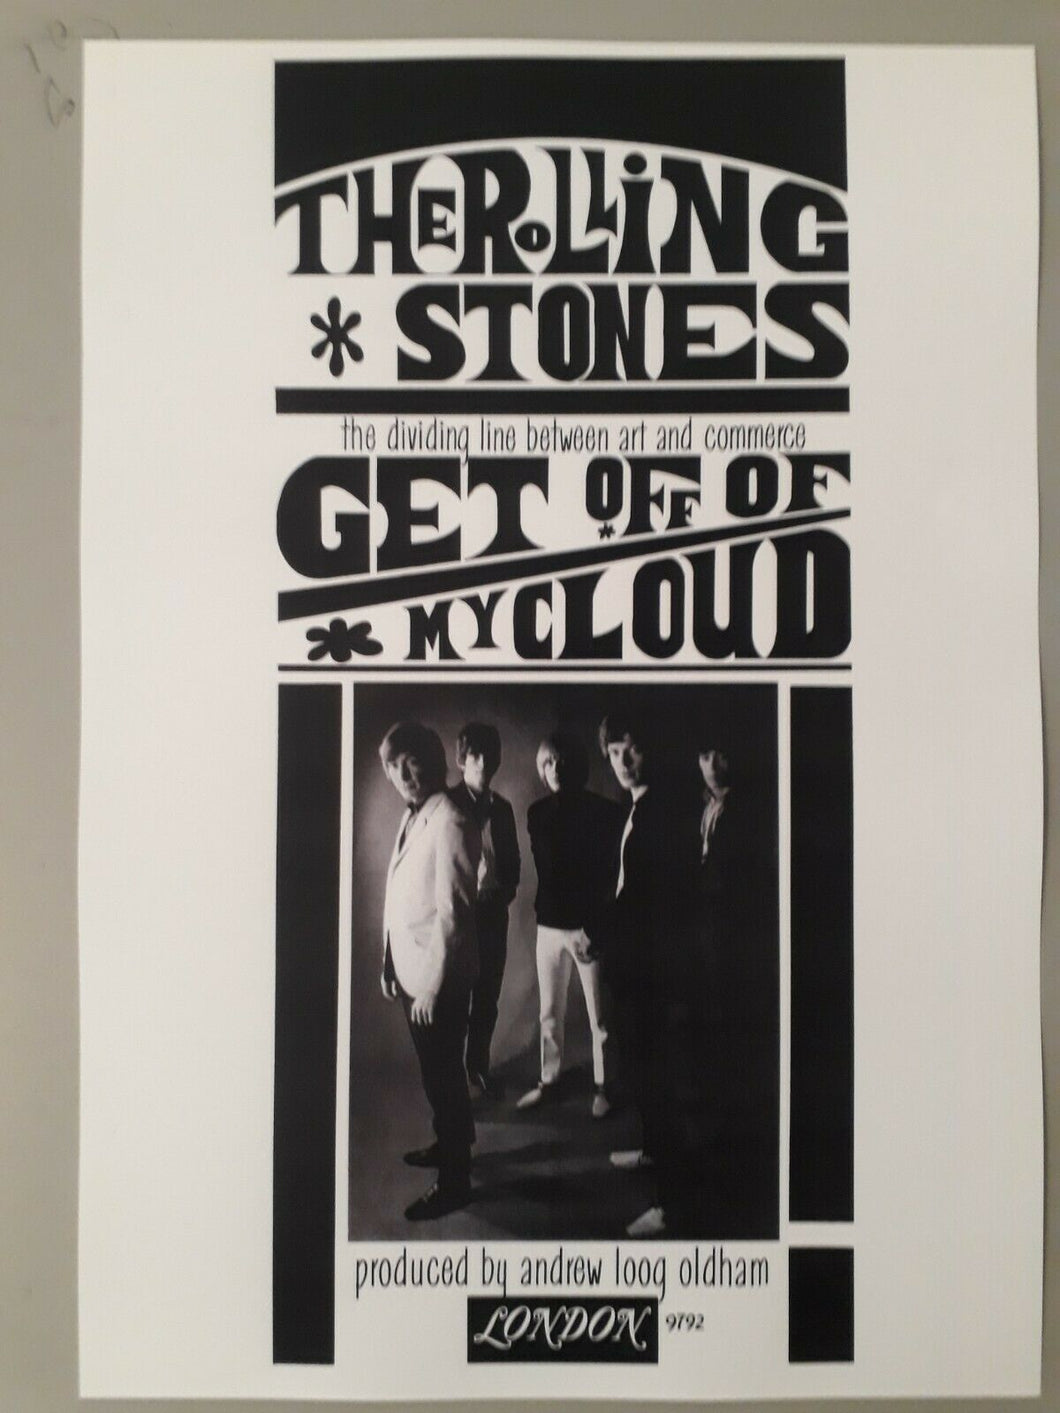 Rolling Stones promotional poster - Get Off of My Cloud 1965 new reprint A3 size - Original Music and Movie Posters for sale from Bamalama - Online Poster Store UK London